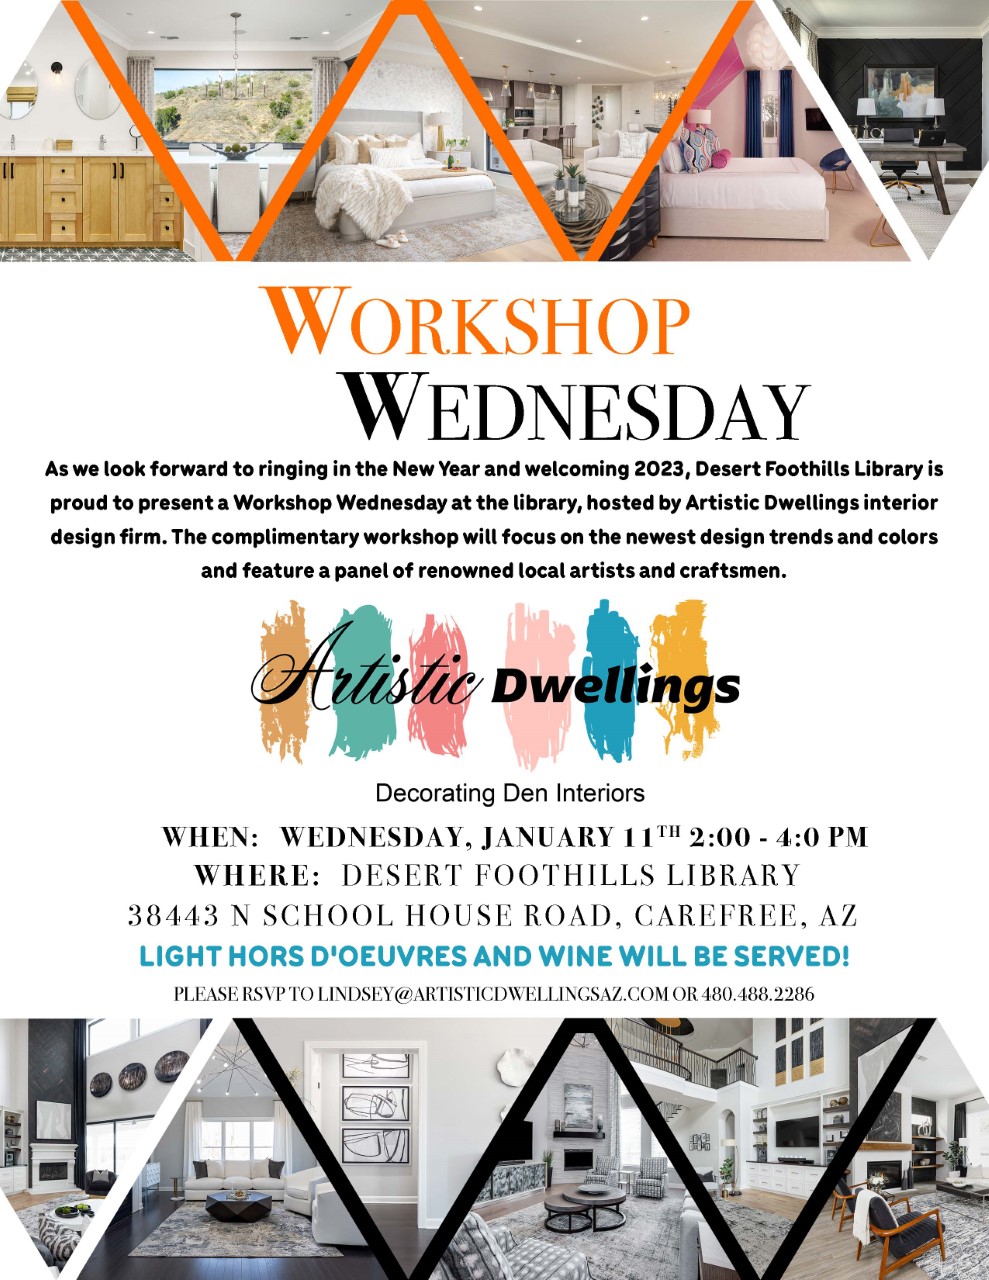 Artistic Dwellings presents a complimentary workshop on the latest design trends!